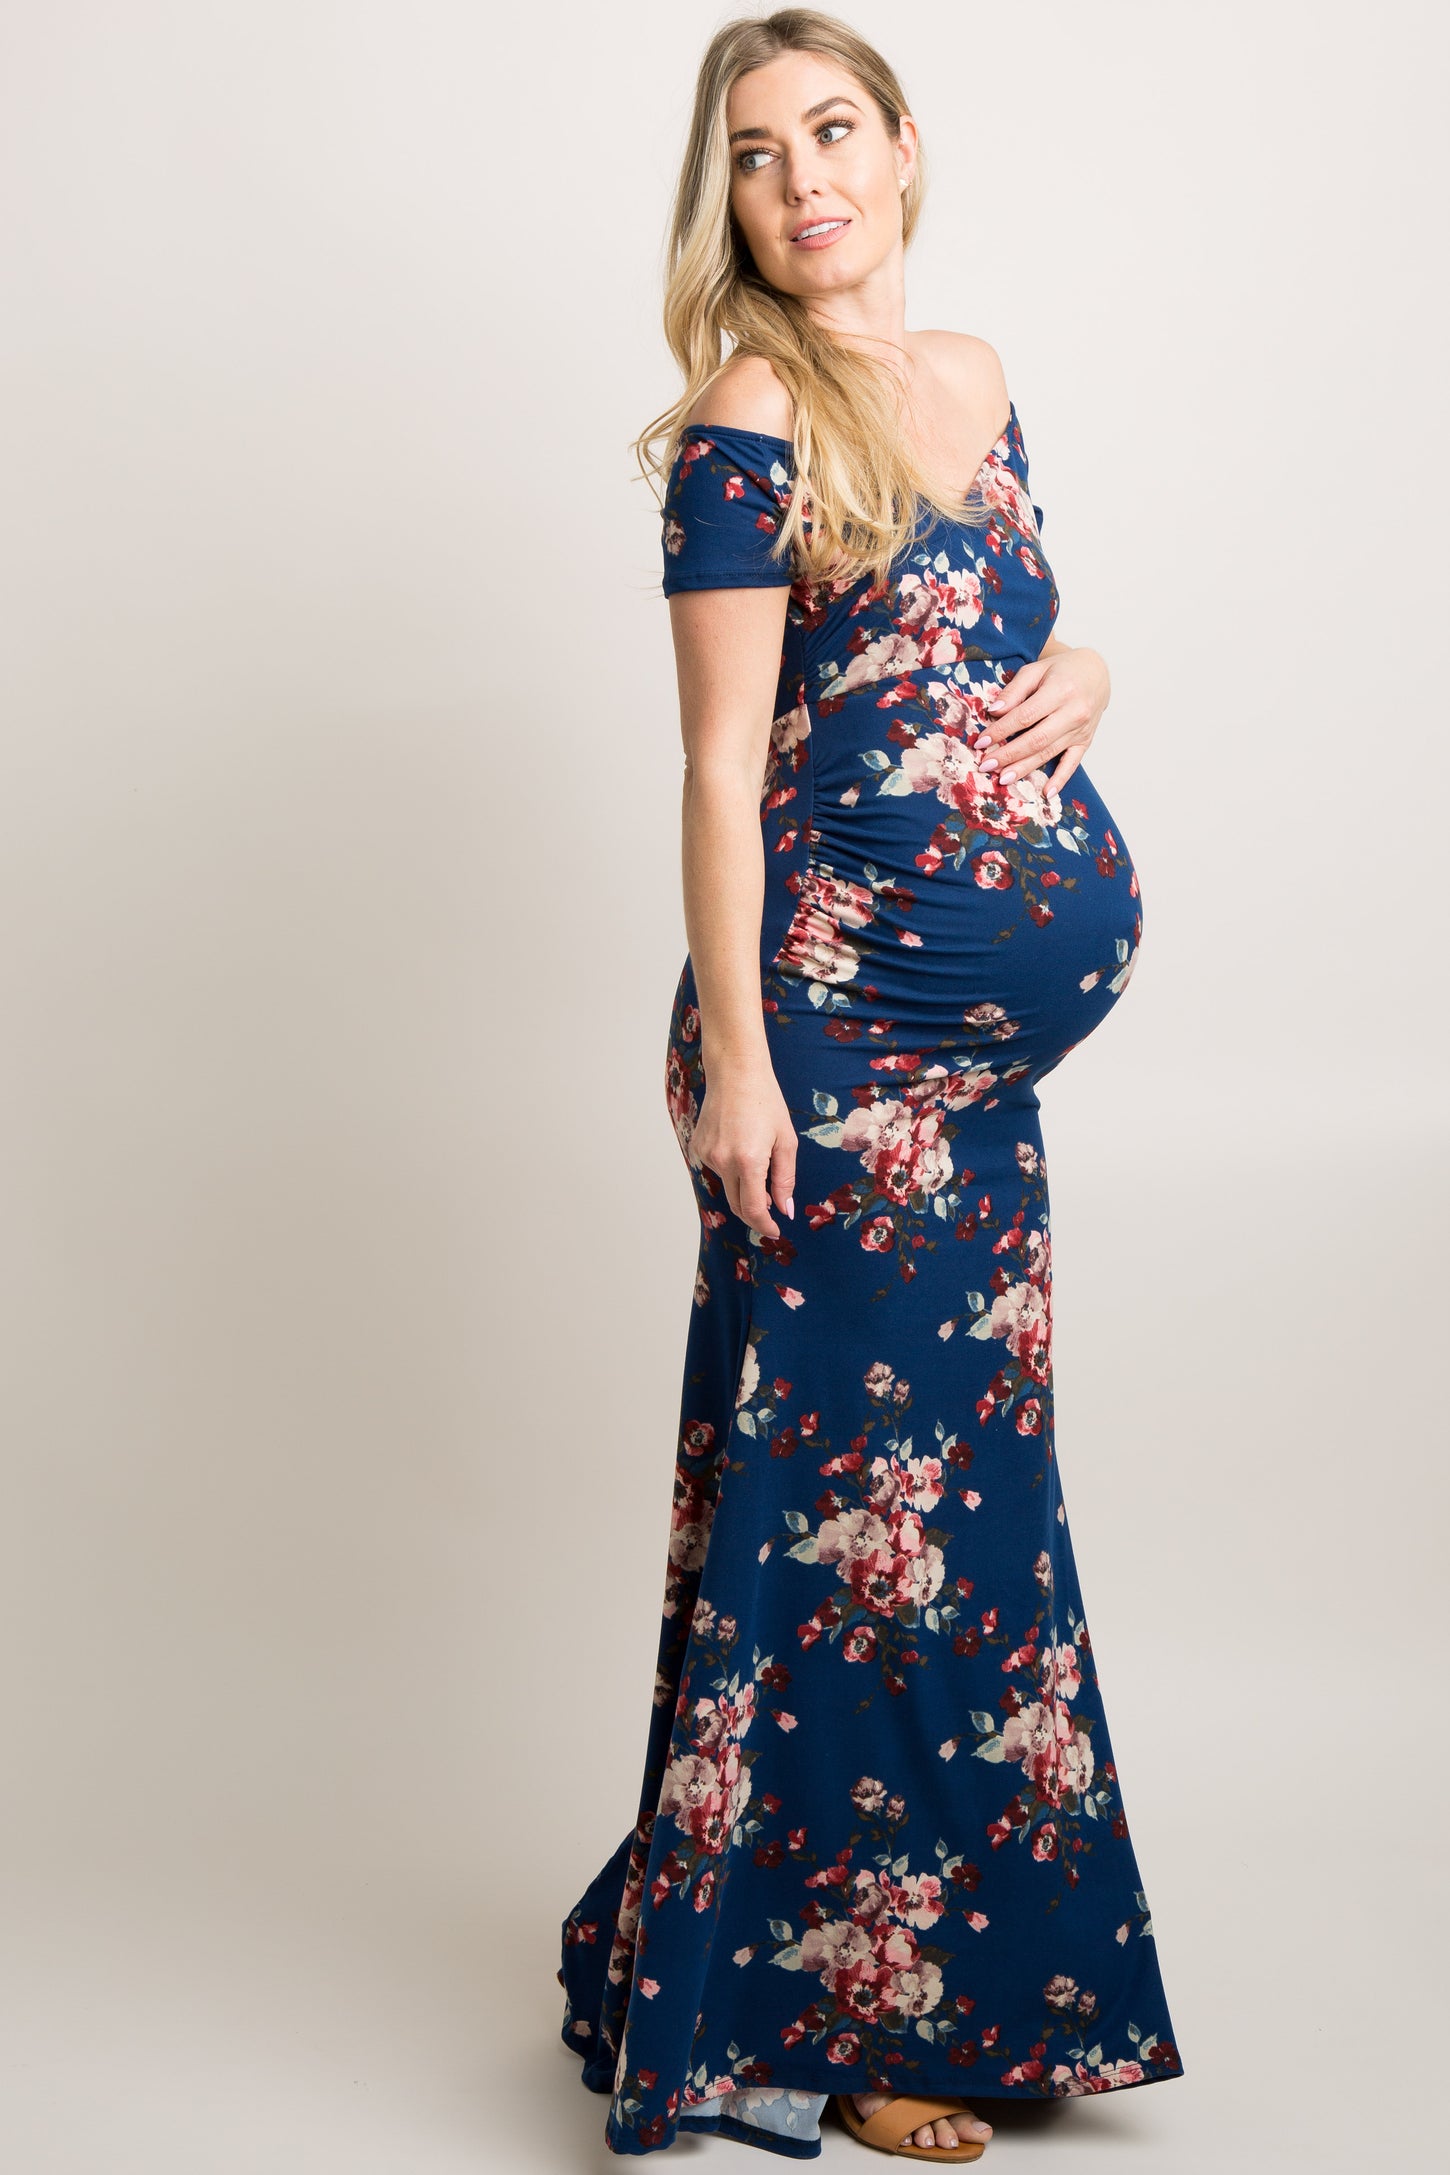 Navy Floral Off Shoulder Wrap Maternity Photoshoot Gown/Dress